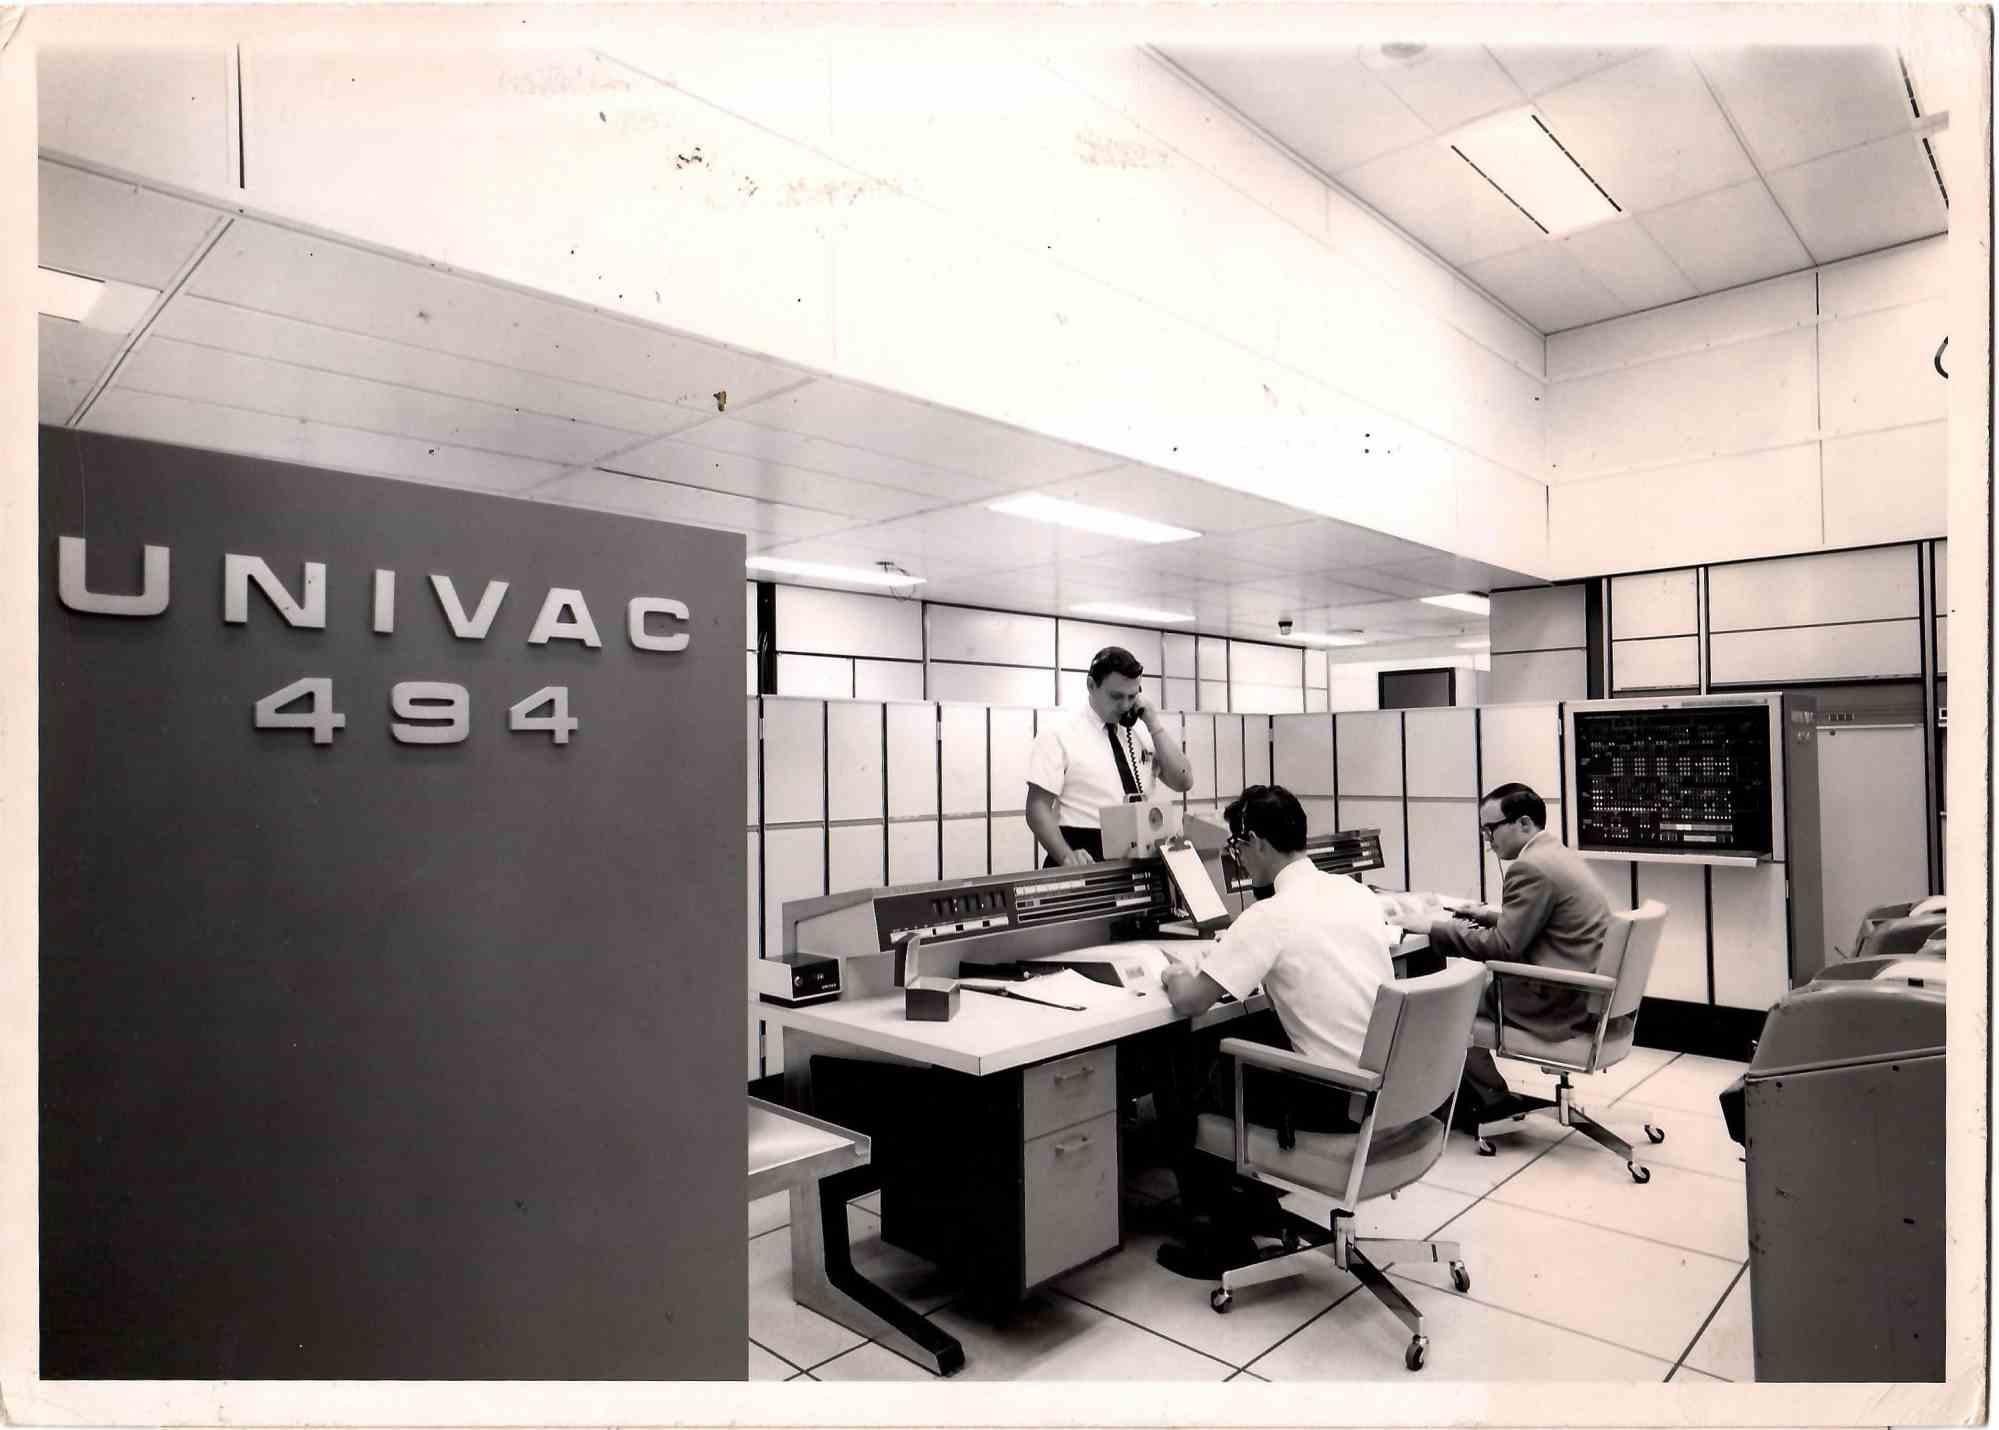 Men on the moon, UNIVAC 494 - Vintage Photograph - Early 1970's